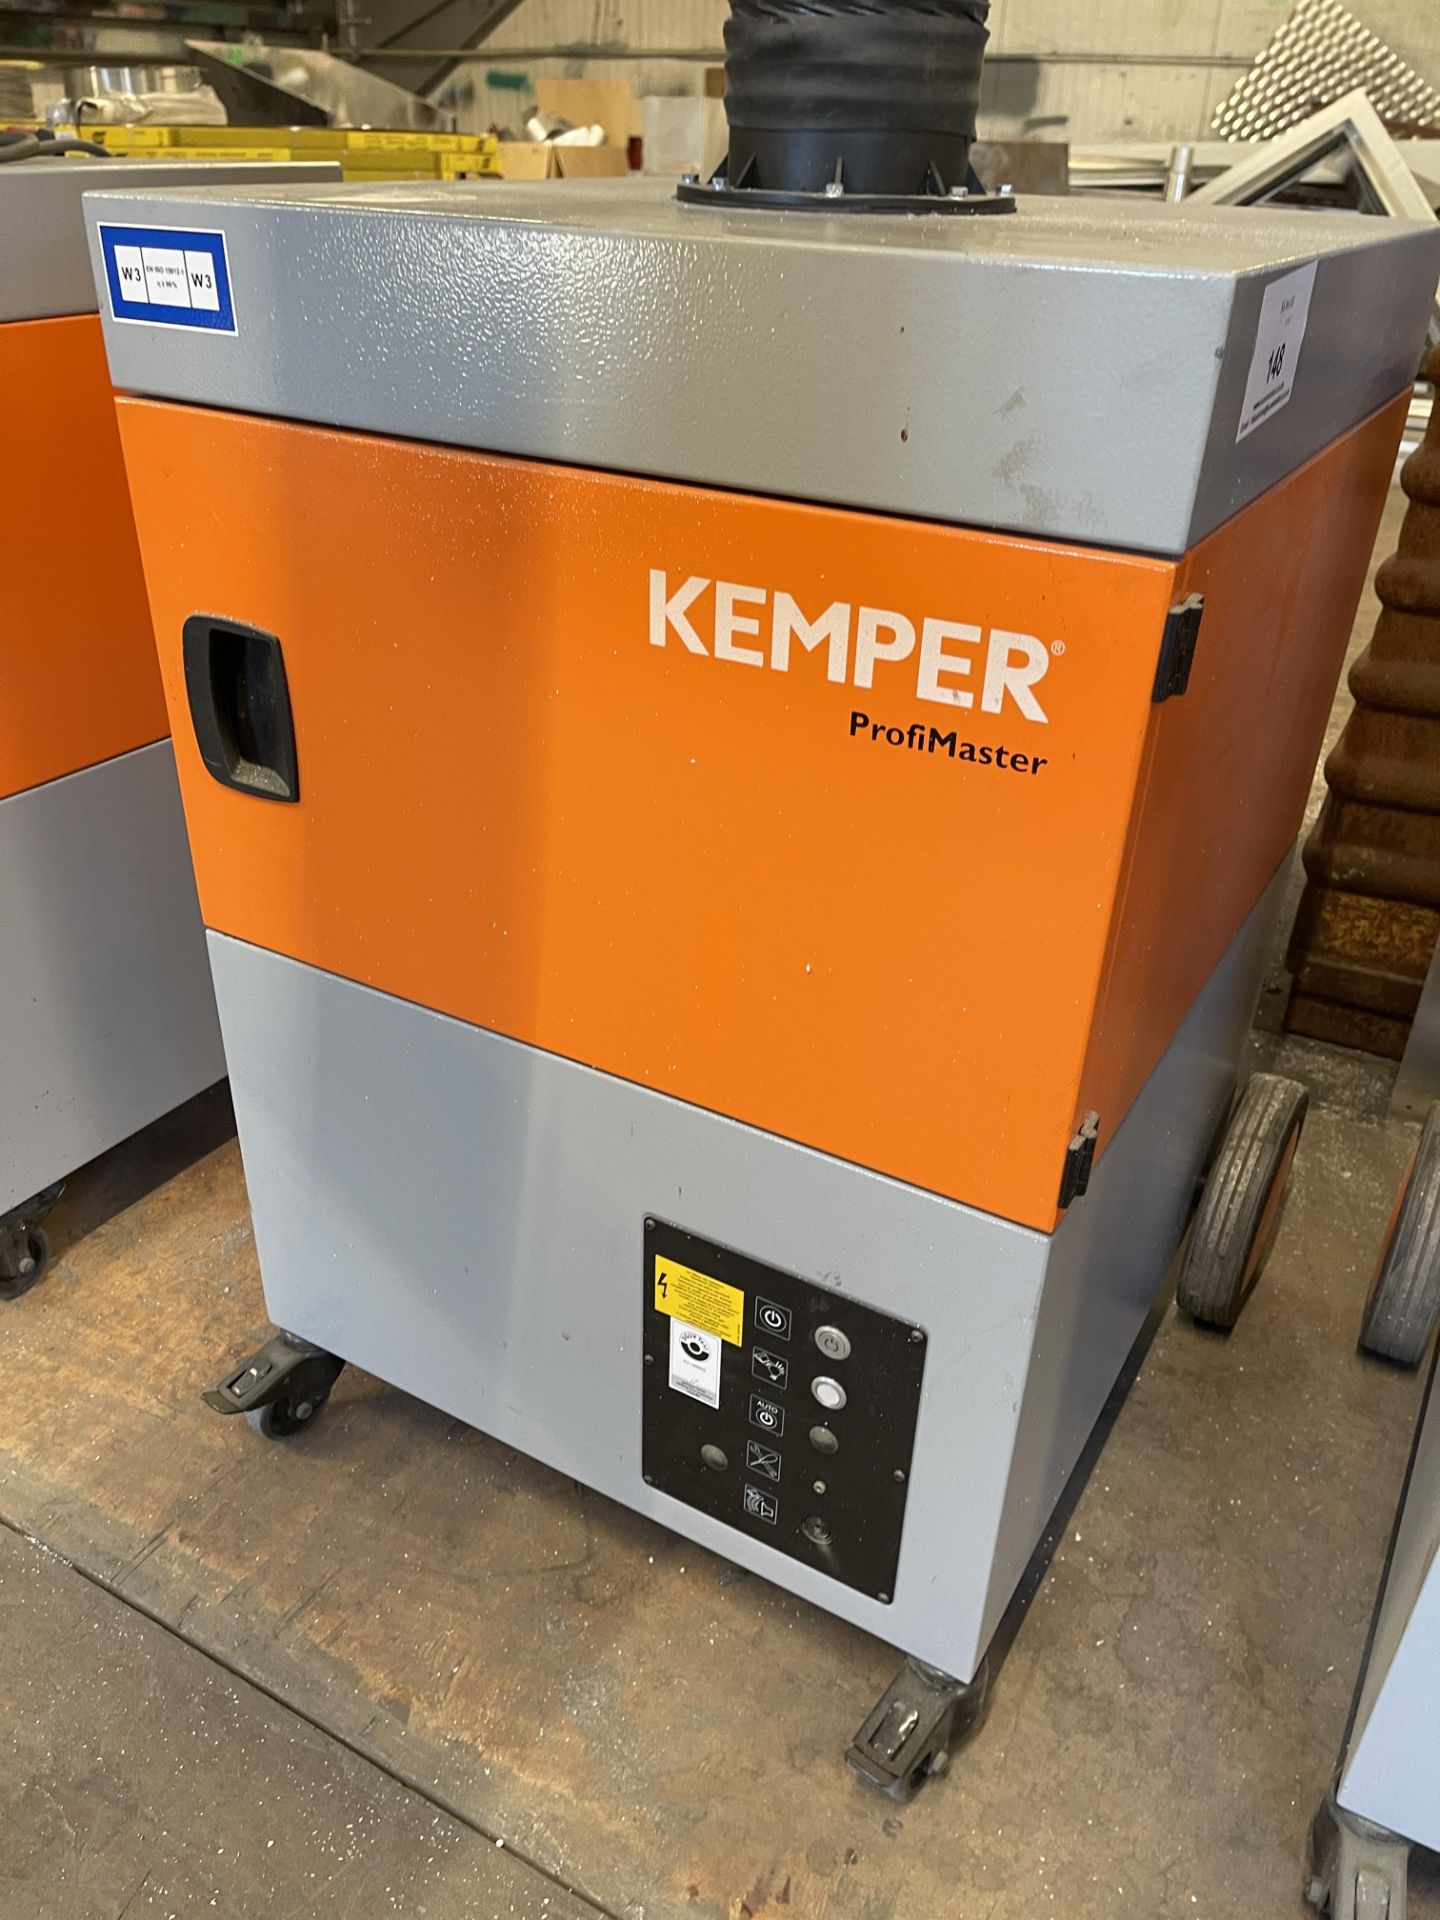 Kemper ProfiMaster Type 60650 Mobile Compact Fume Extraction Unit, Weight 95Kg, Serial No.210200850, - Image 4 of 6